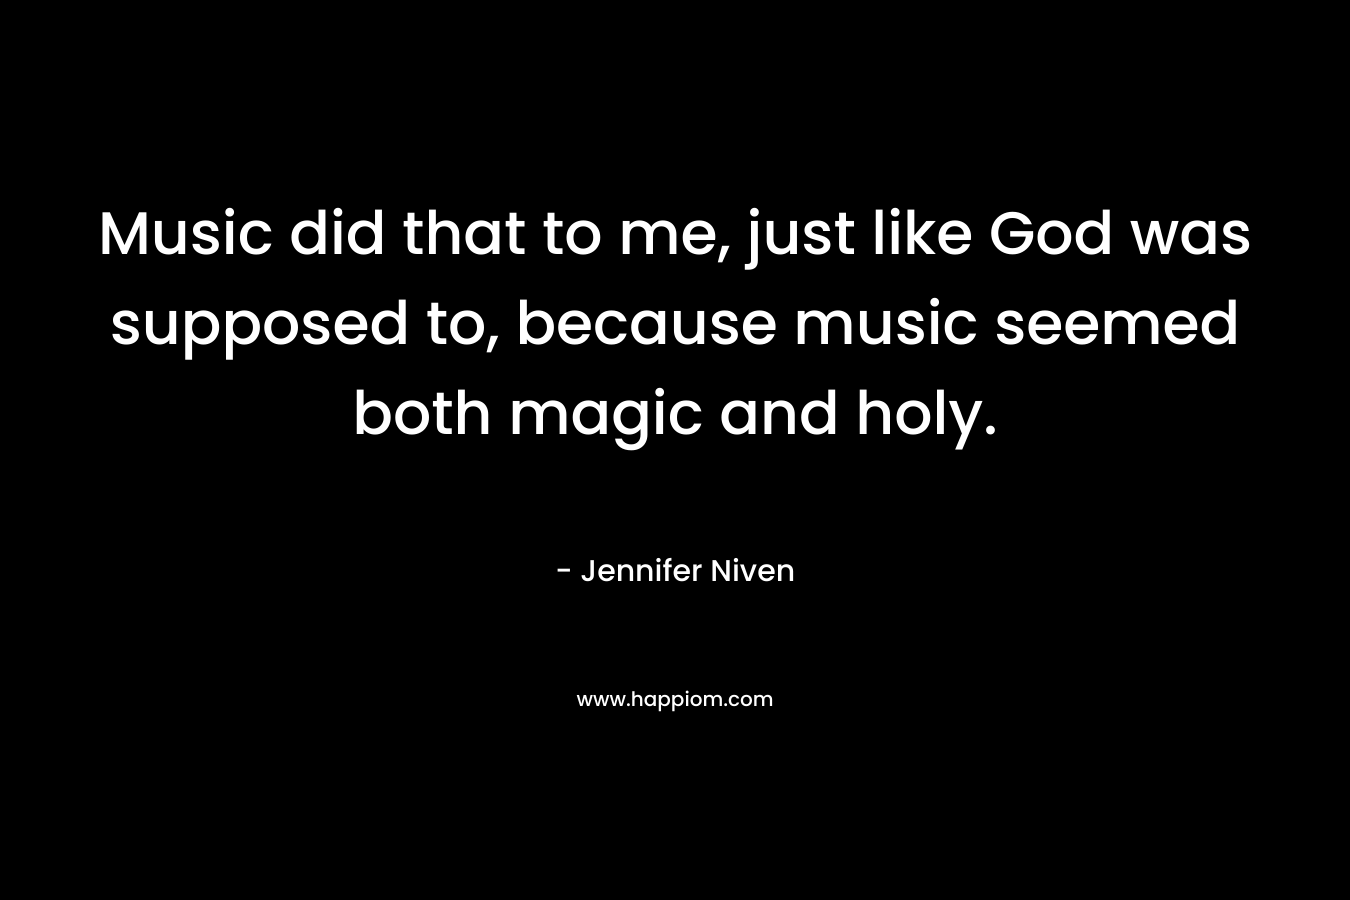 Music did that to me, just like God was supposed to, because music seemed both magic and holy. – Jennifer Niven